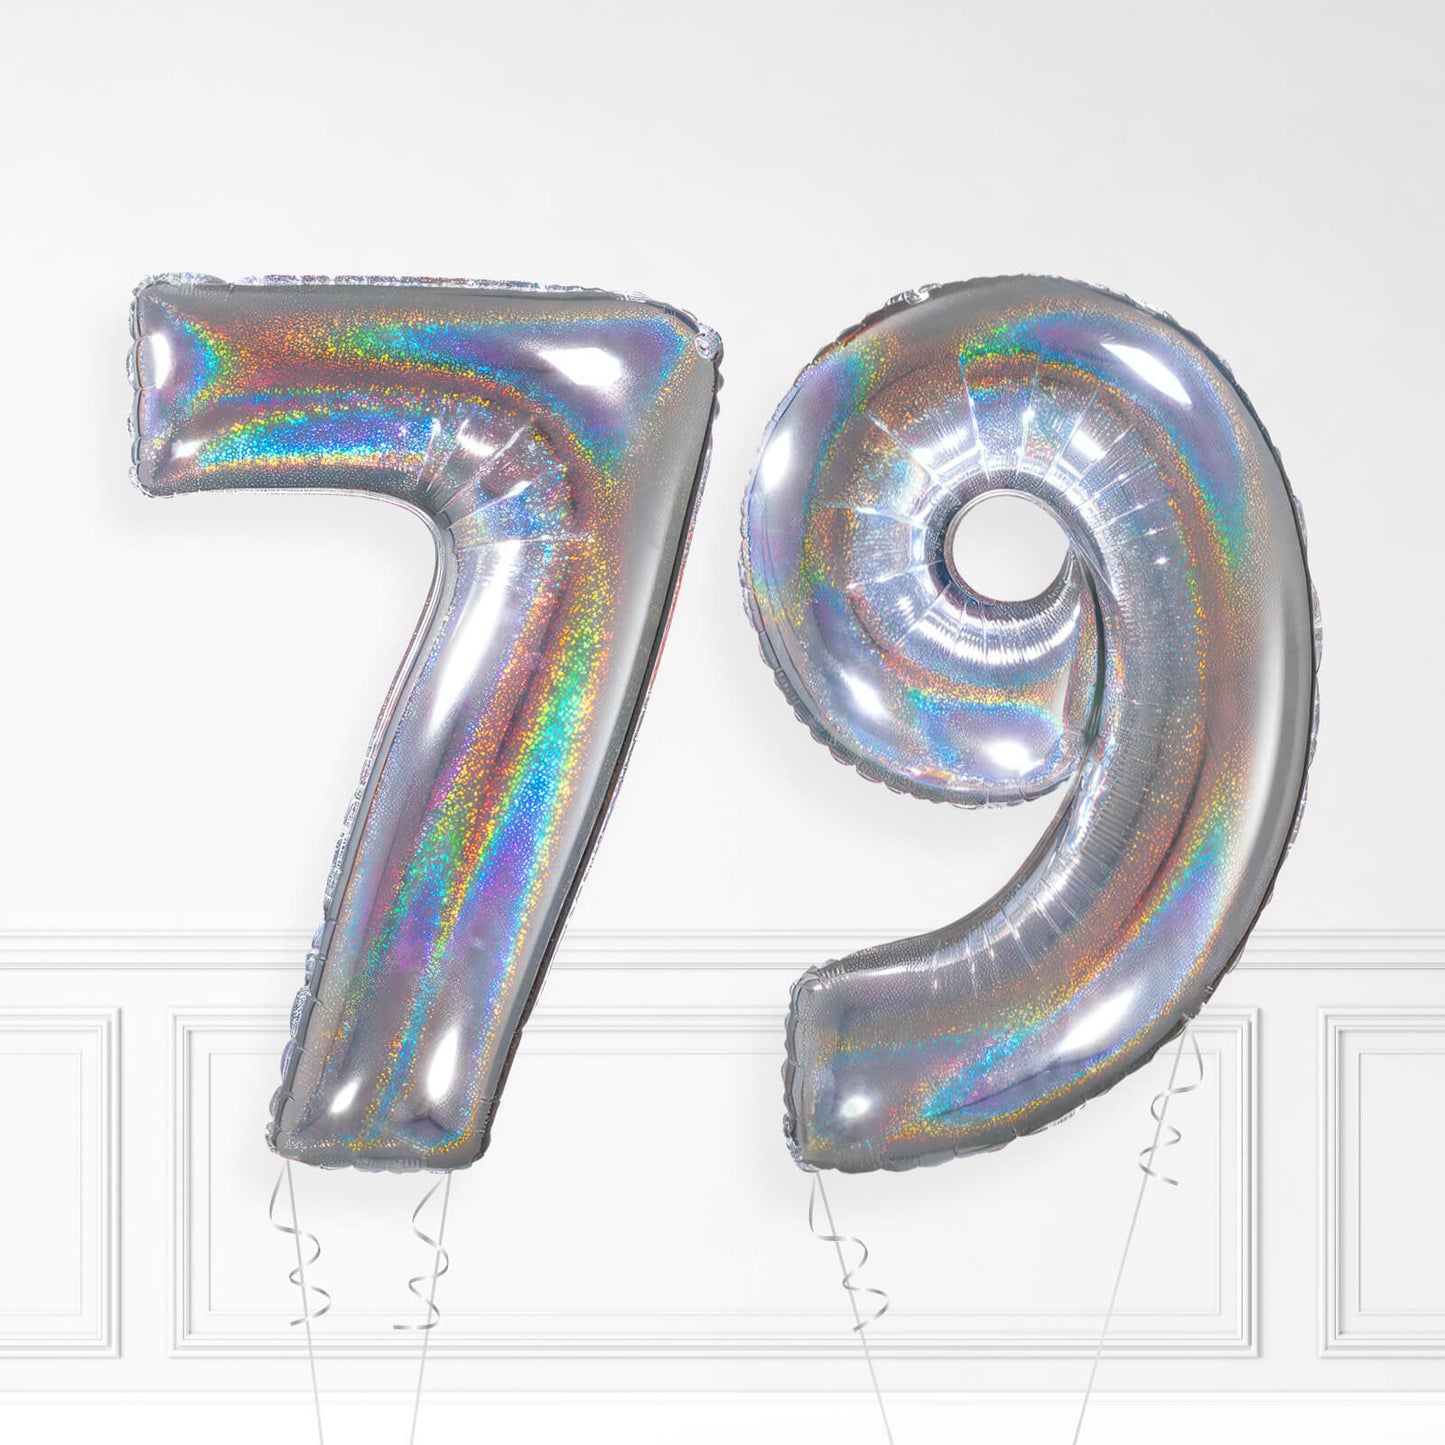 Inflated Holographic Foil Number Balloon